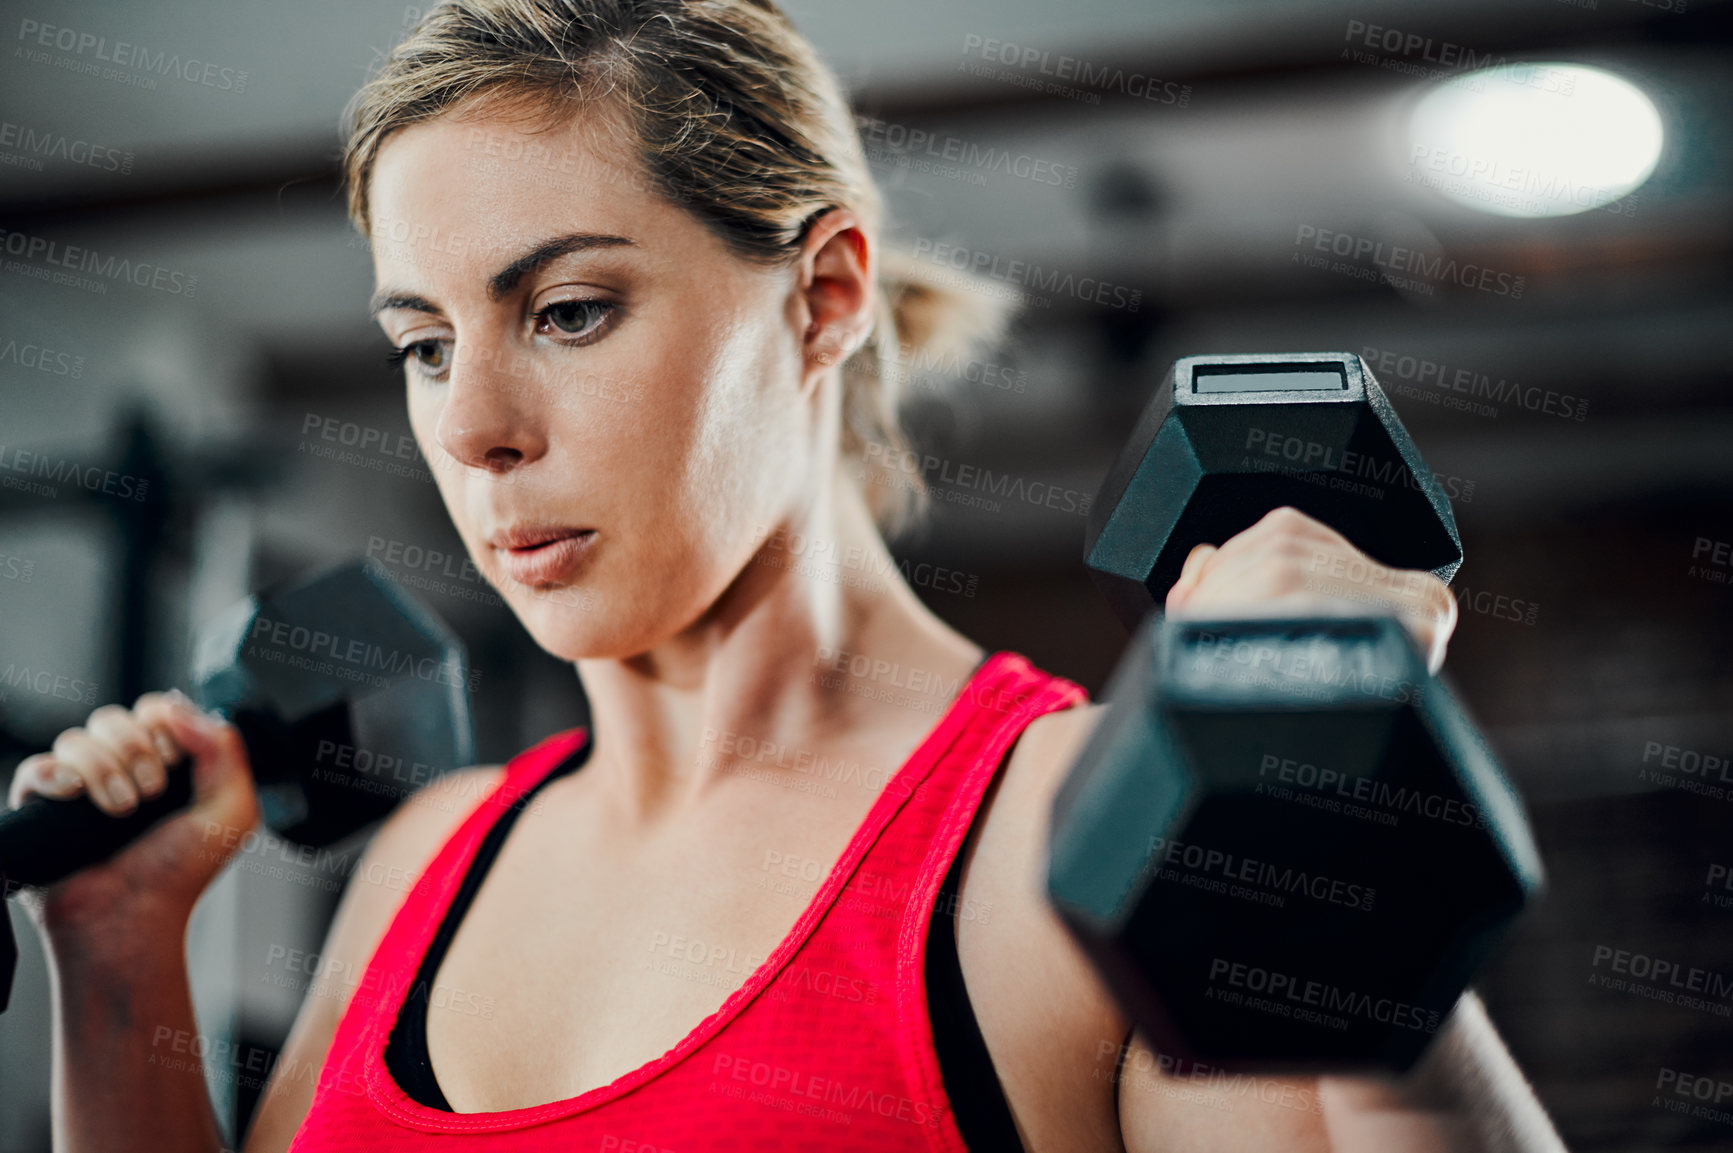 Buy stock photo Cropped shot of an attractive young female athlete working out with dumbbells in the gym